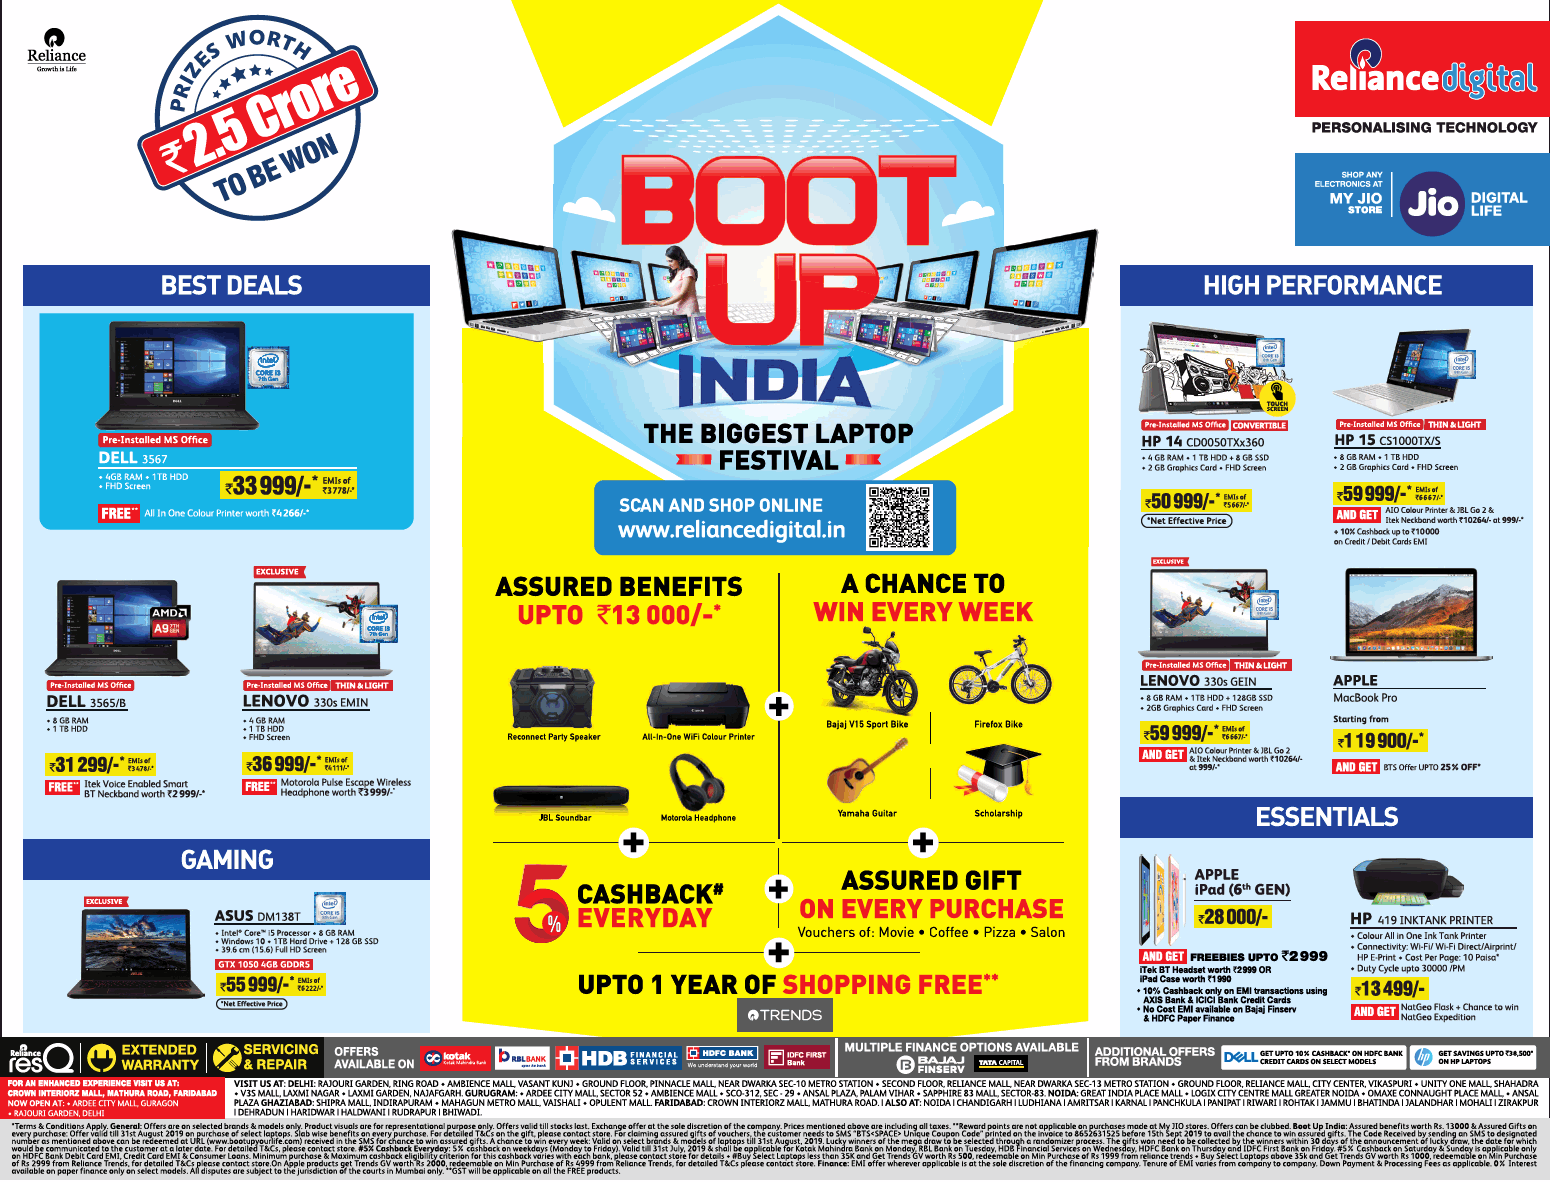 reliance-digital-boot-up-india-the-biggest-laptop-festival-ad-delhi-times-06-07-2019.png